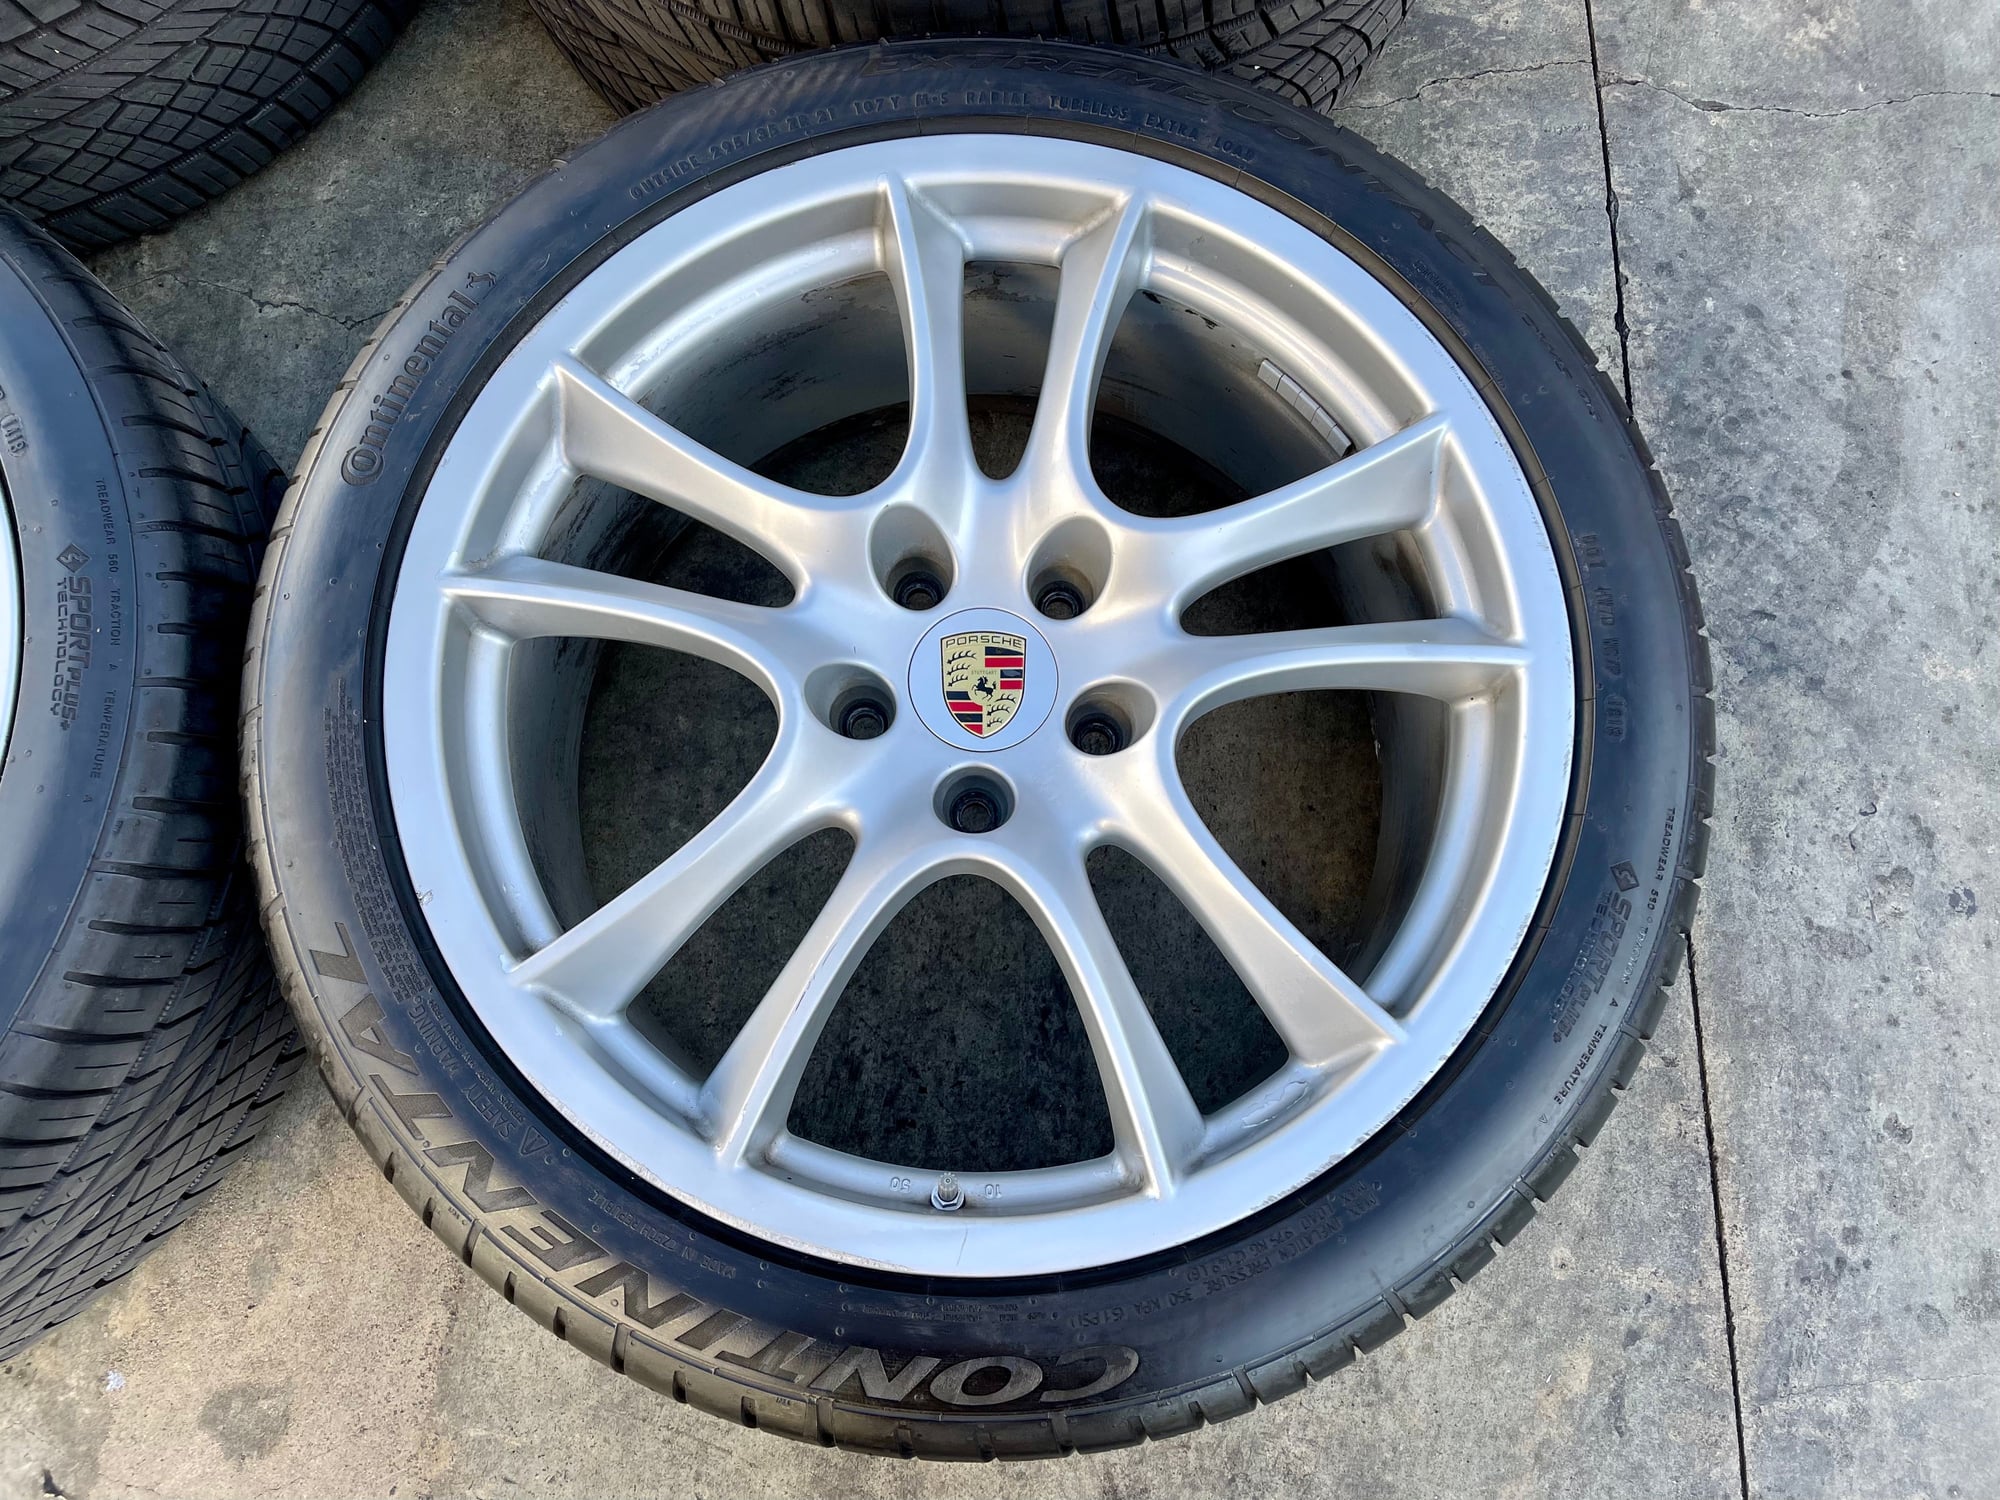 Wheels and Tires/Axles - 21” Cayenne Sport / GTS Wheel, Tires, TPMS Set - Used - 2004 to 2010 Porsche Cayenne - Los Angeles, CA 90001, United States